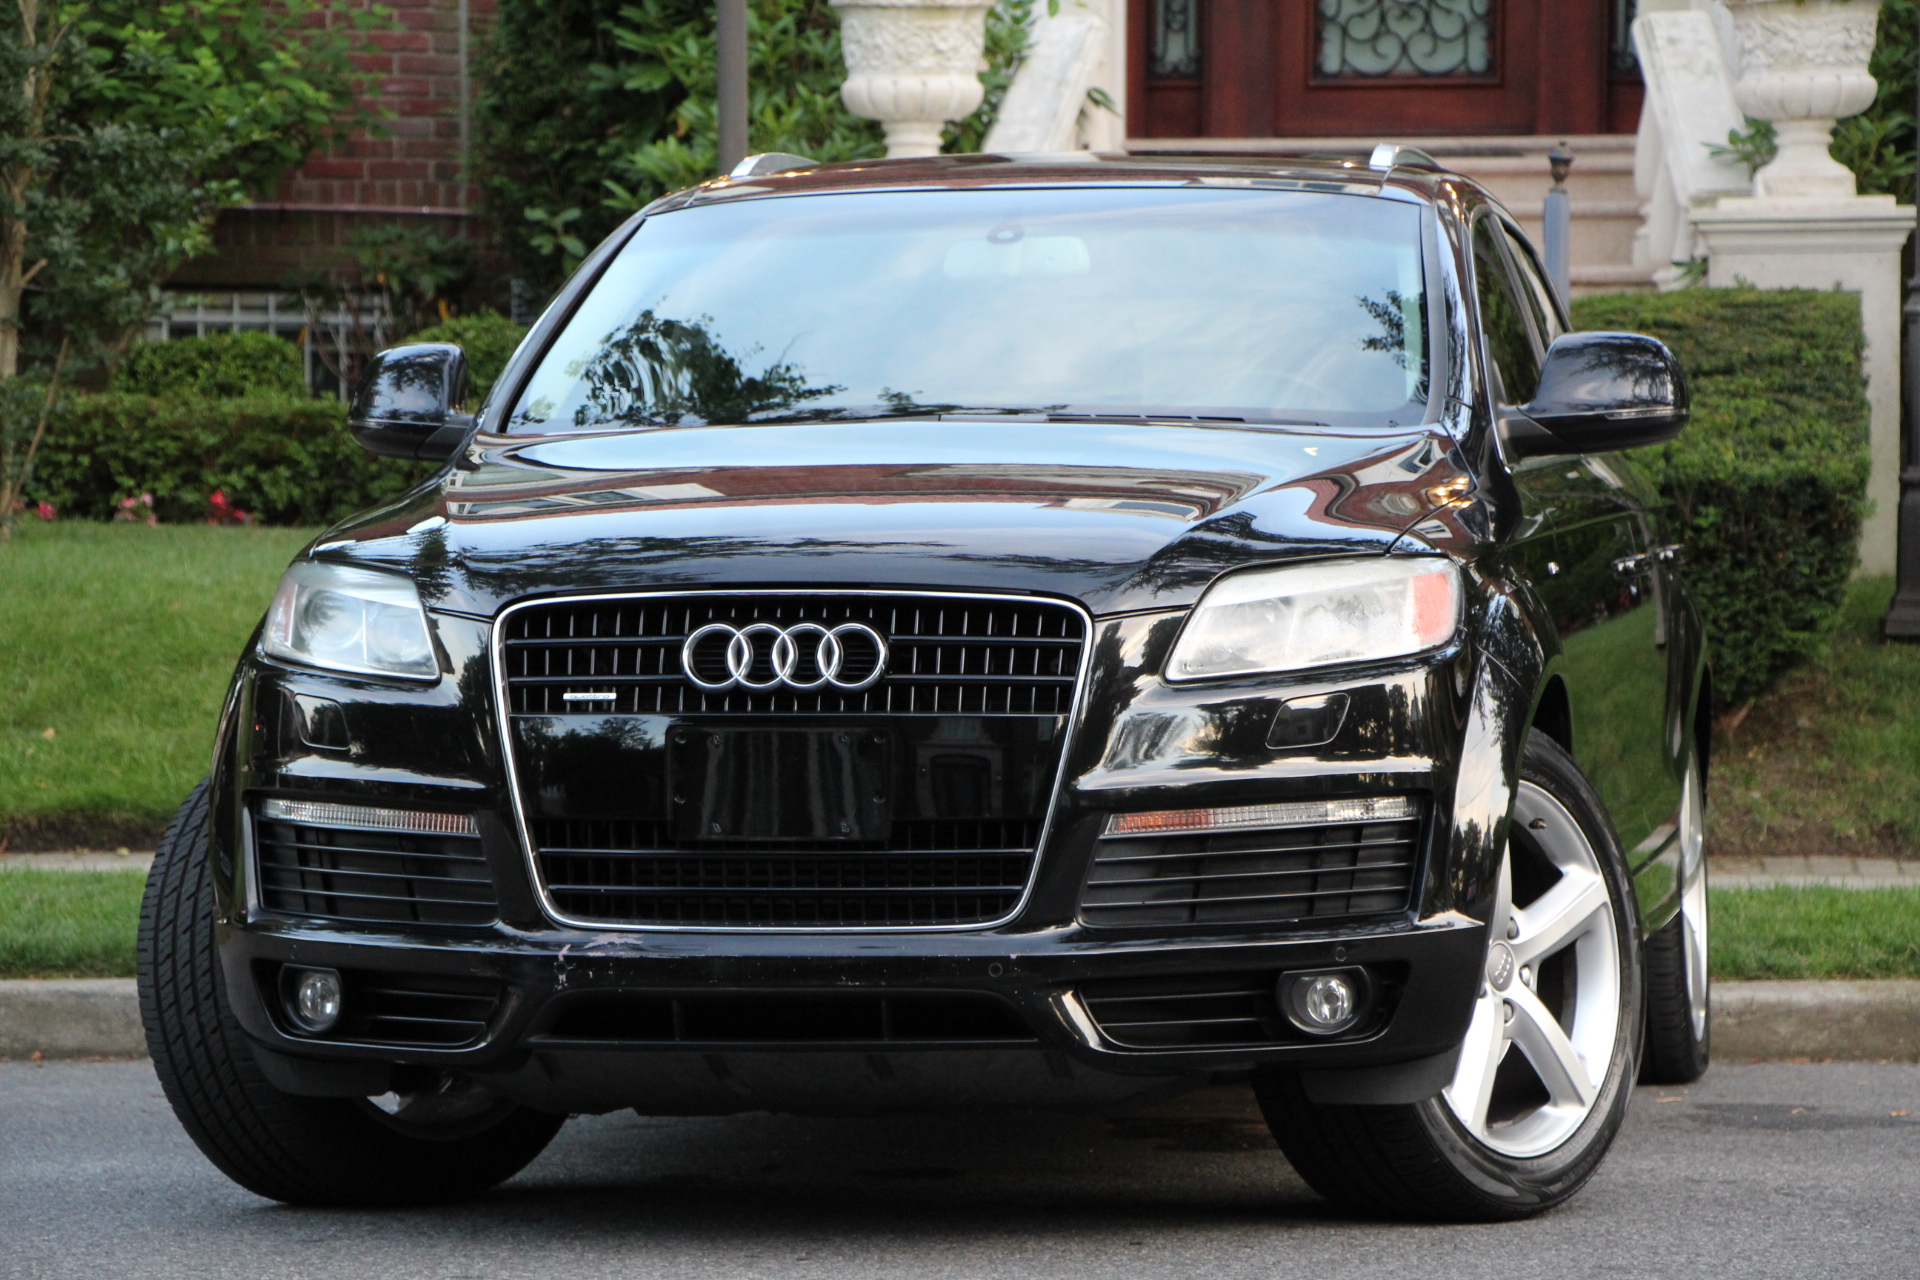 Buy Used 2009 AUDI Q7 4.2 QUATTRO PRESTIGE S-LINE for $13 900 from trusted  dealer in Brooklyn, NY!